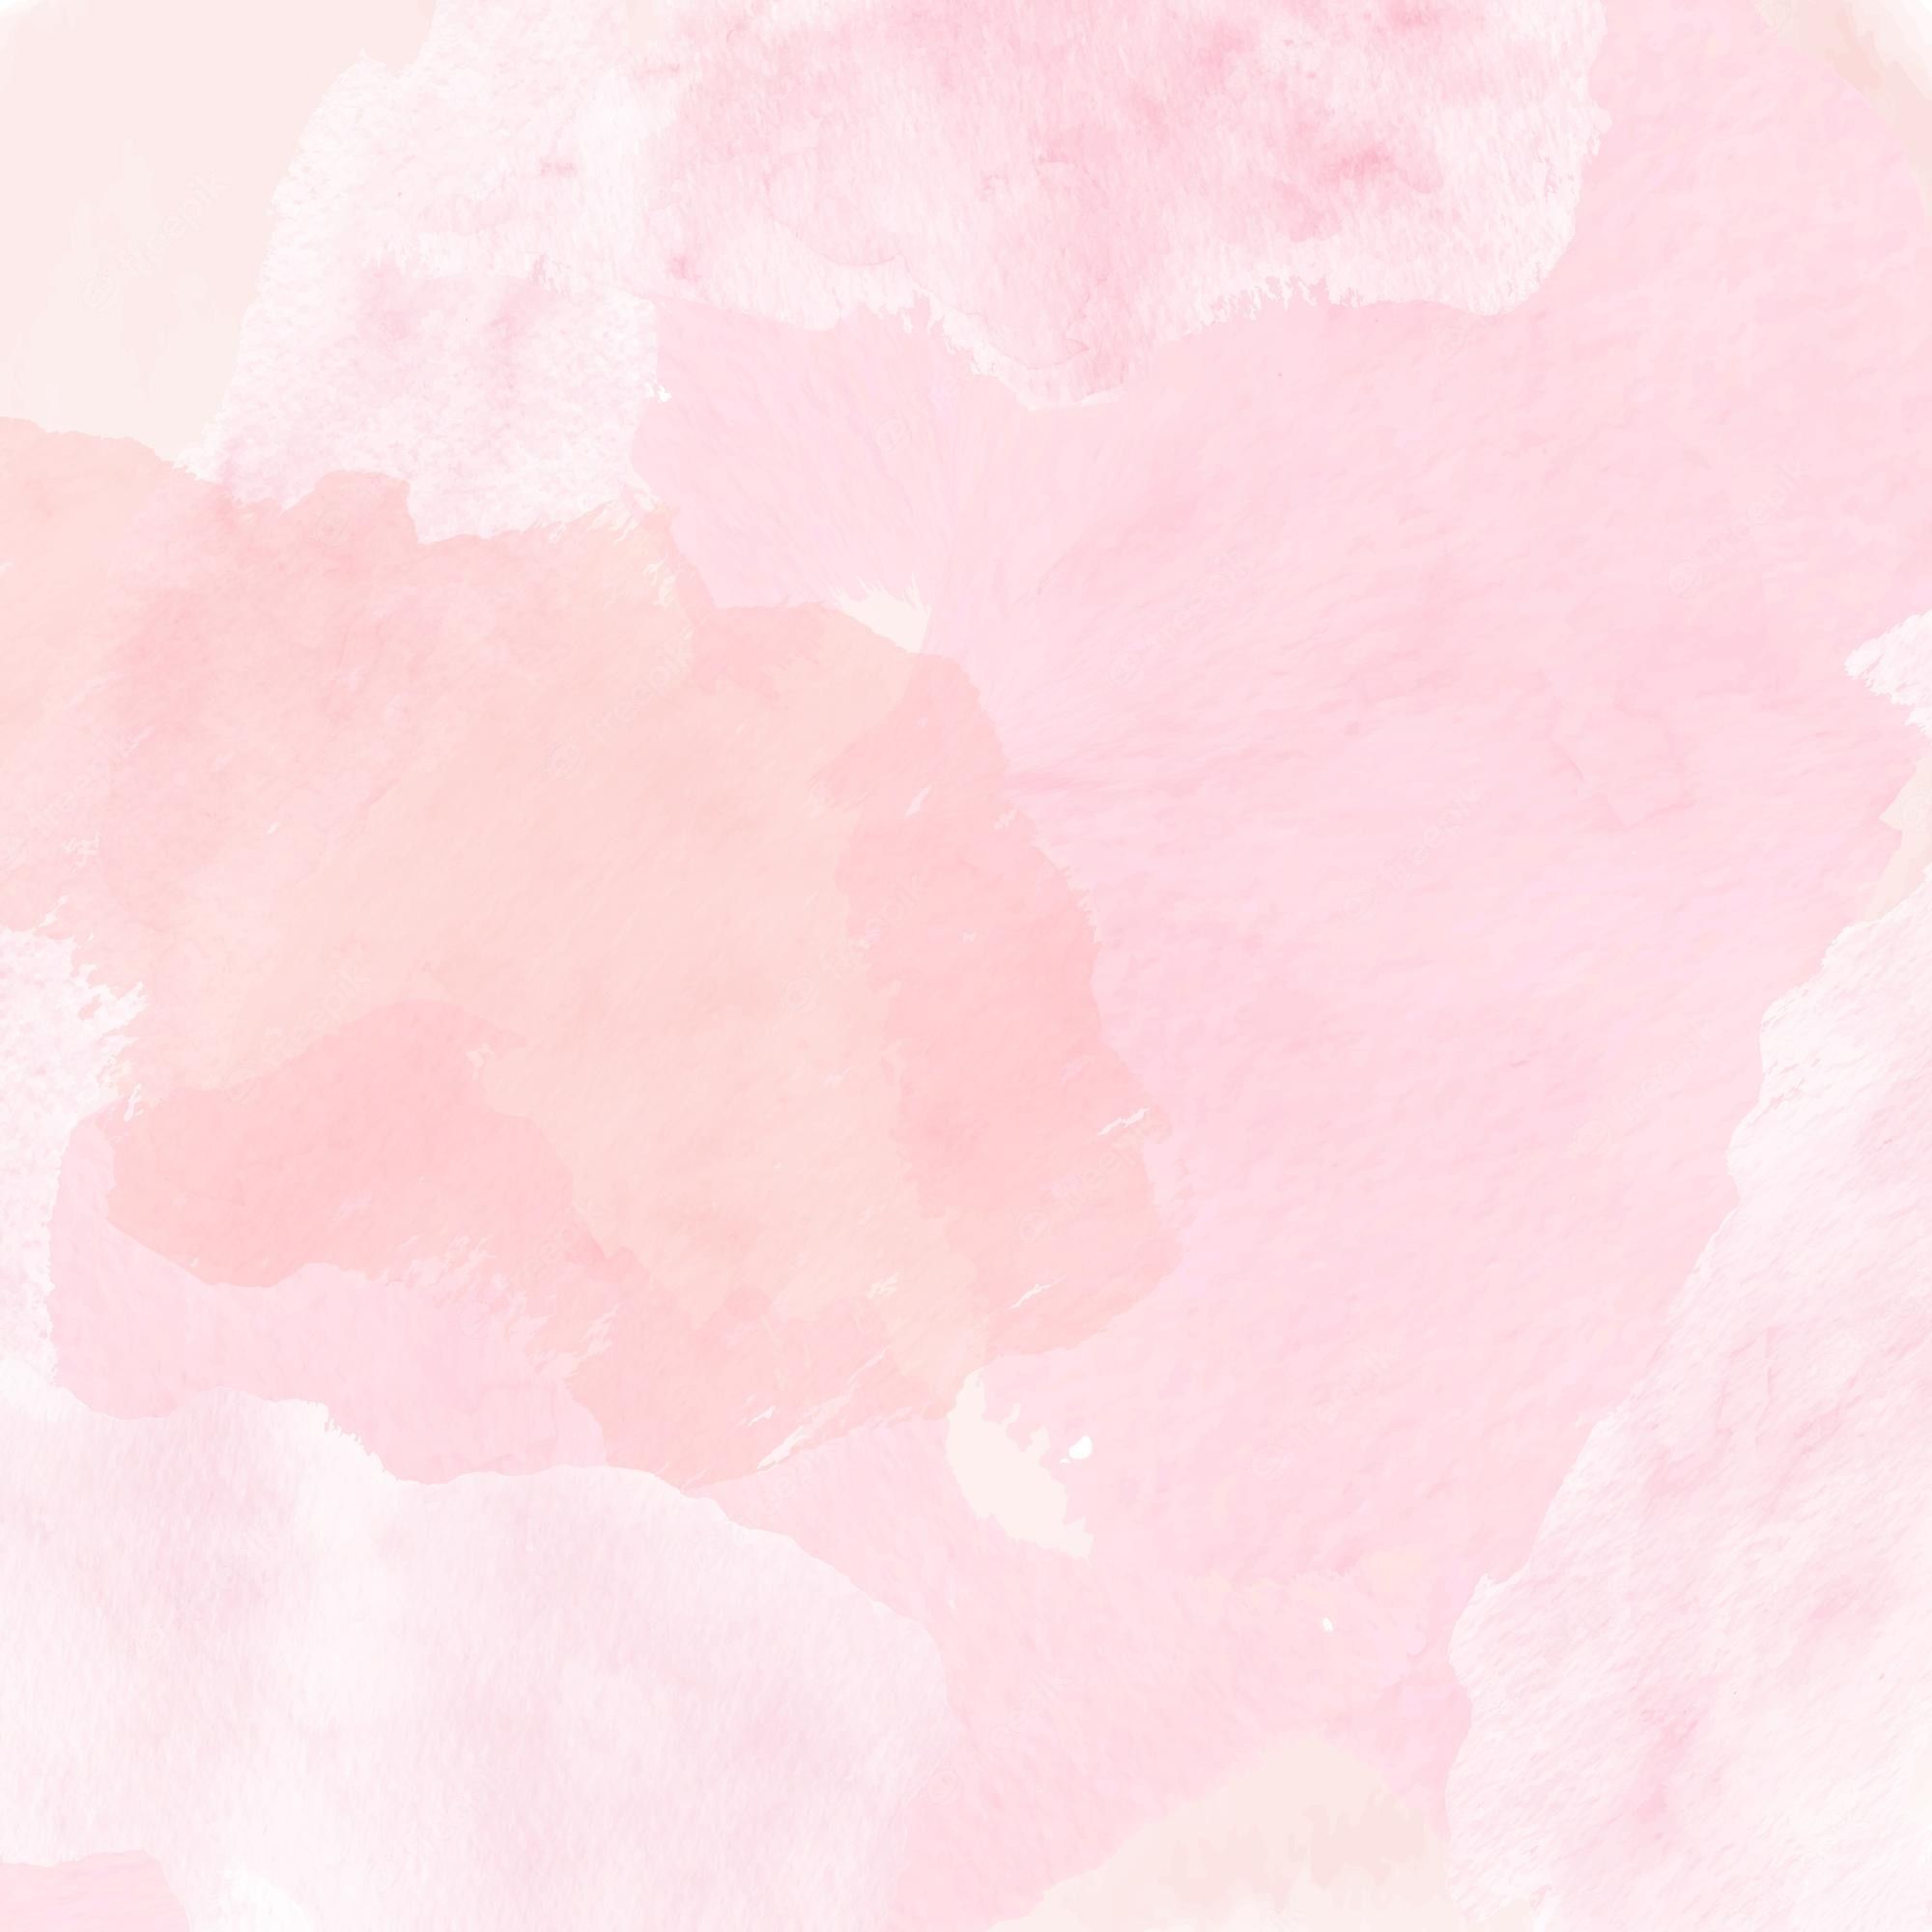 Premium Vector. Abstract pink or apricot watercolor backgroundblush fluid painting